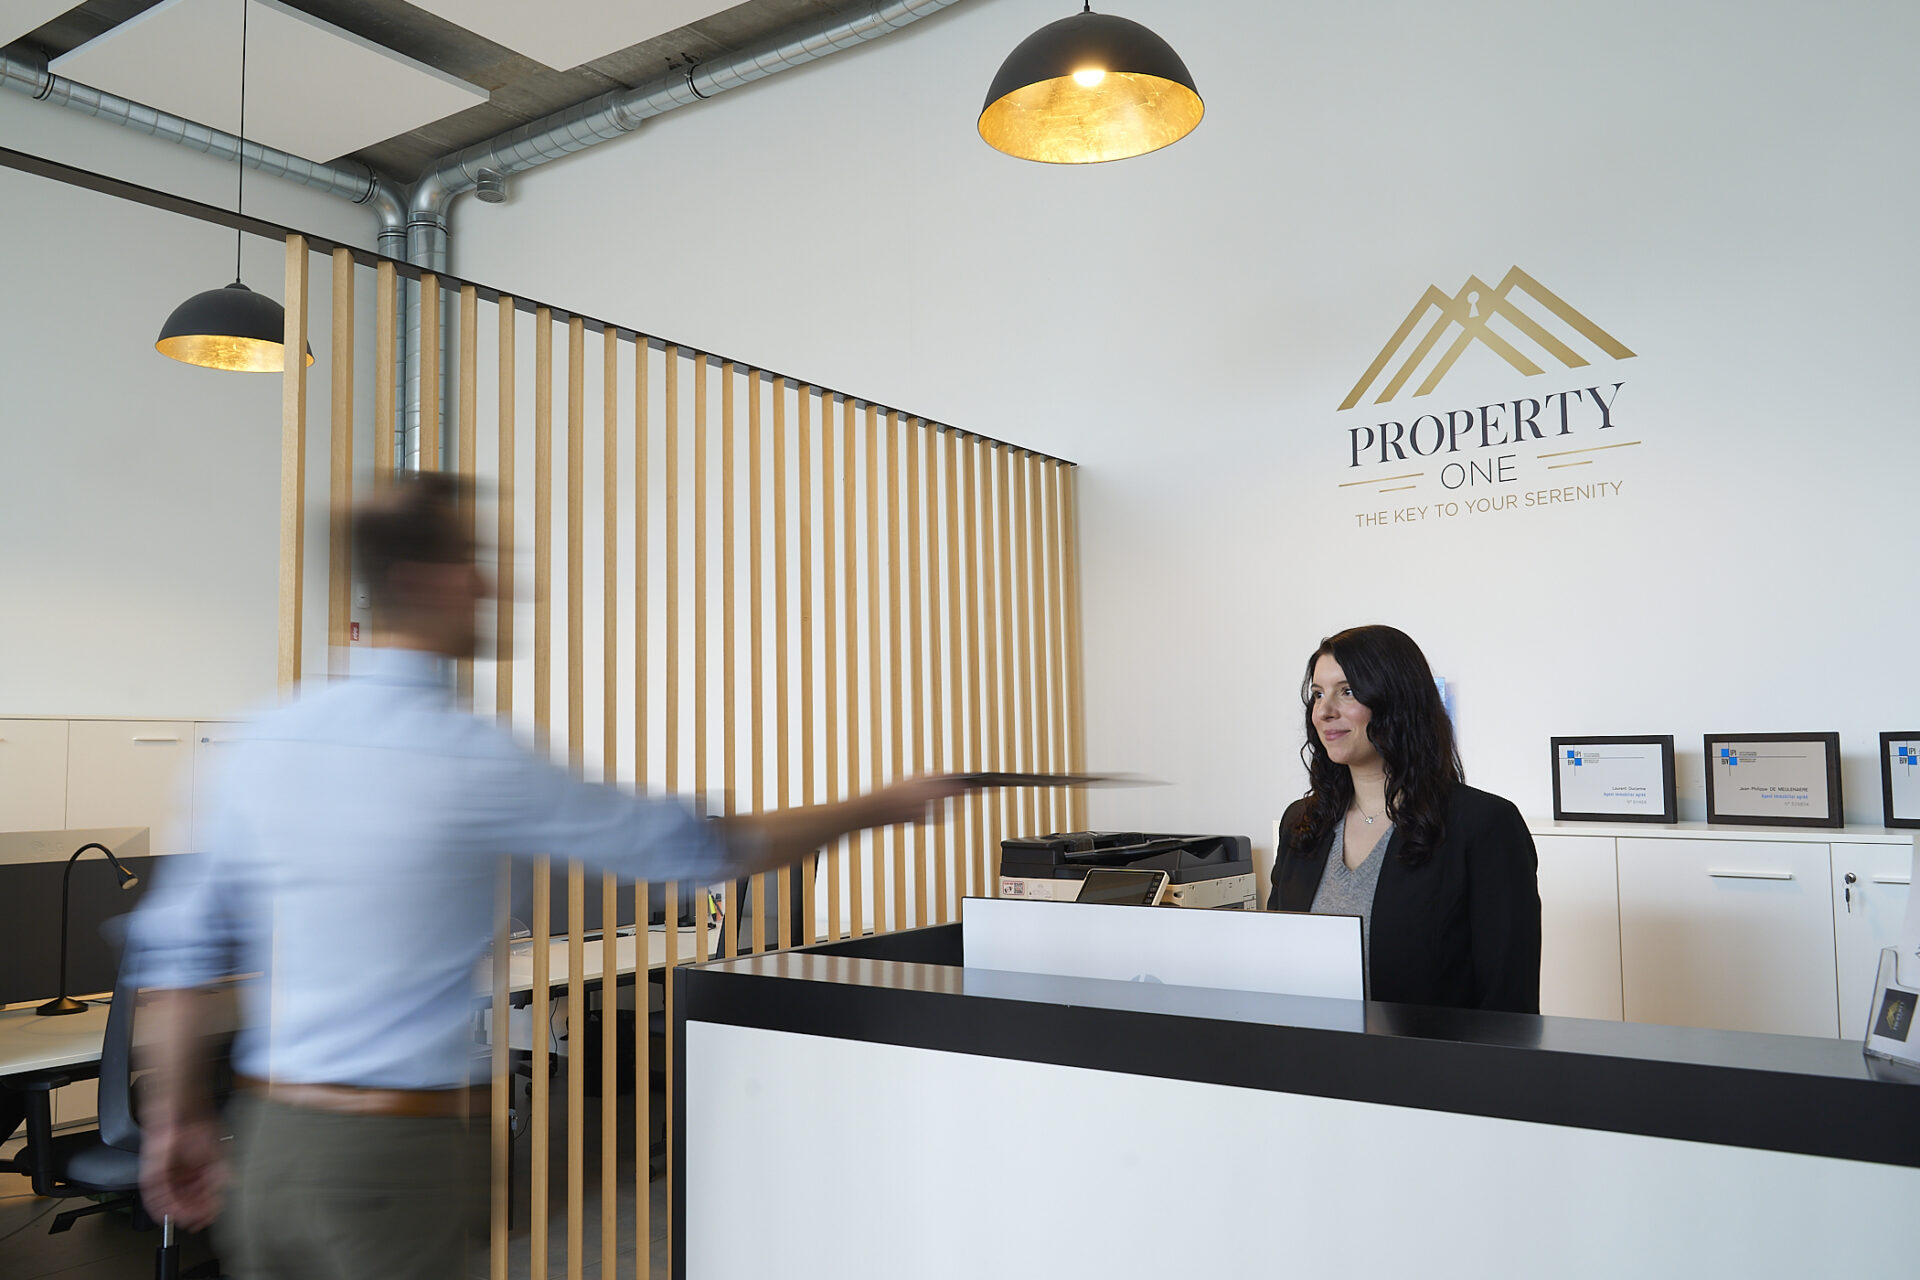 Property One Promoteur immobilier